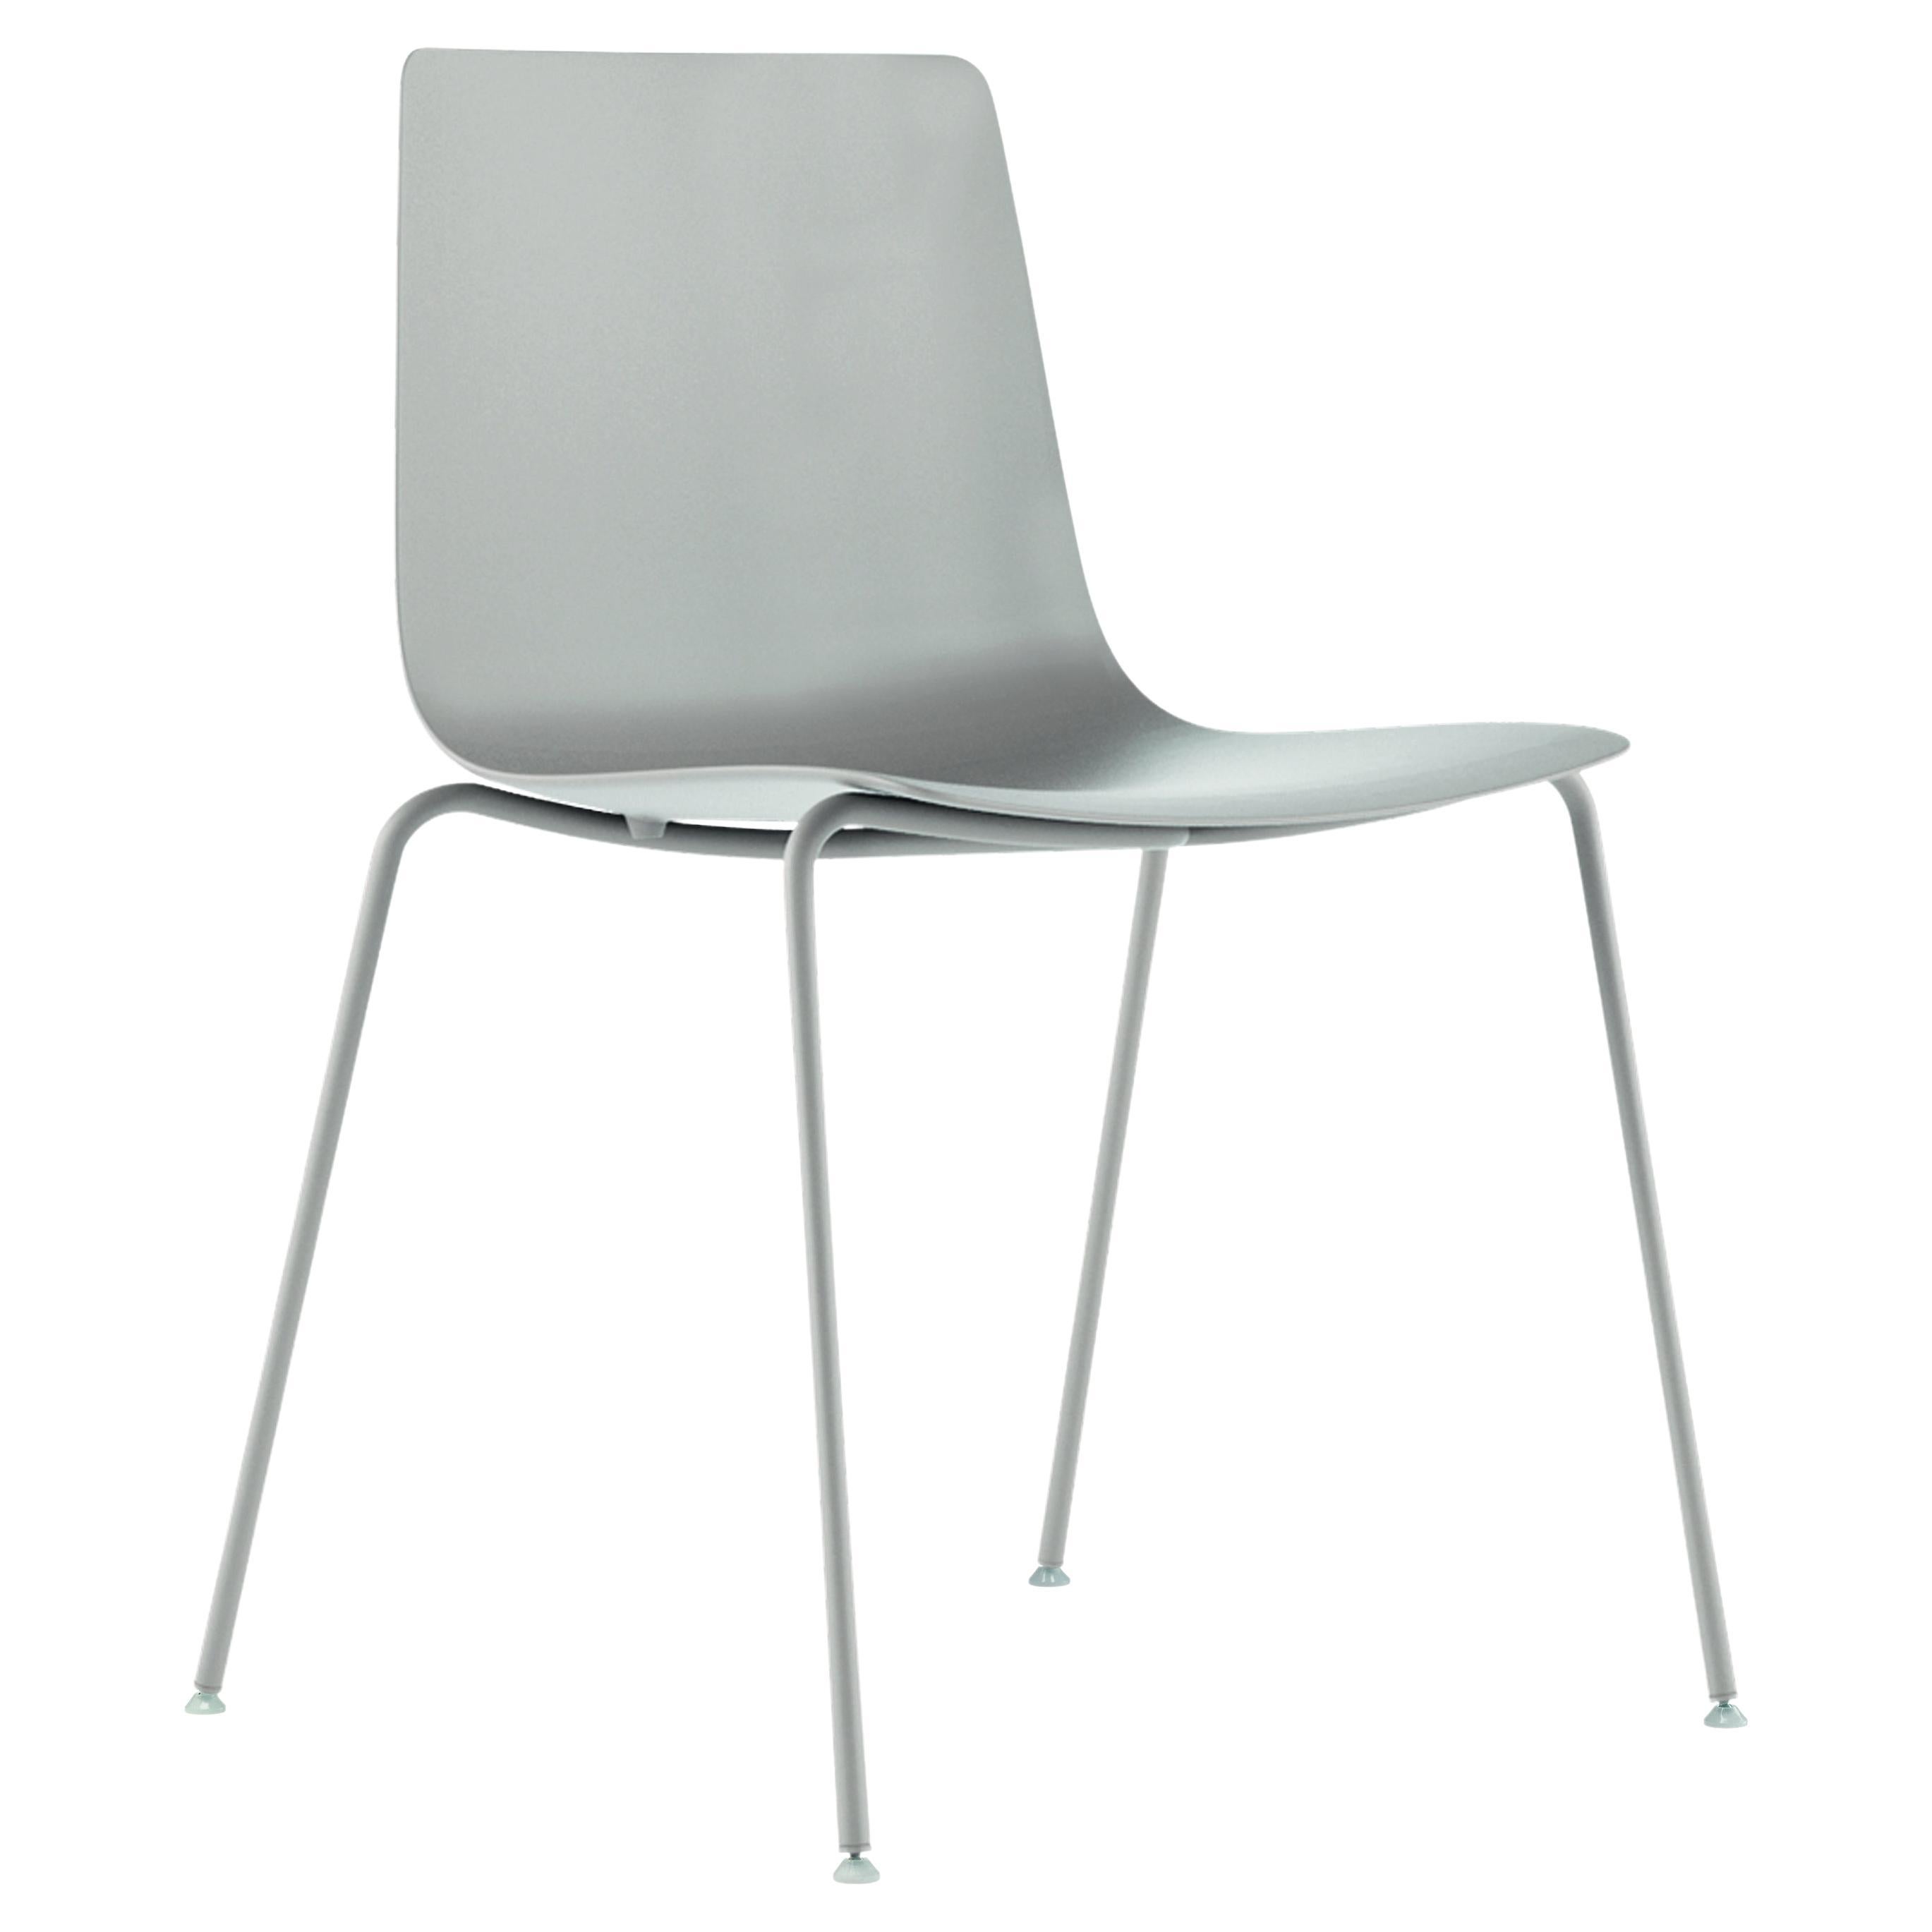 Alias 89C Slim Chair 4 in Light Grey Polypropylene Seat & Lacquered Steel Frame For Sale